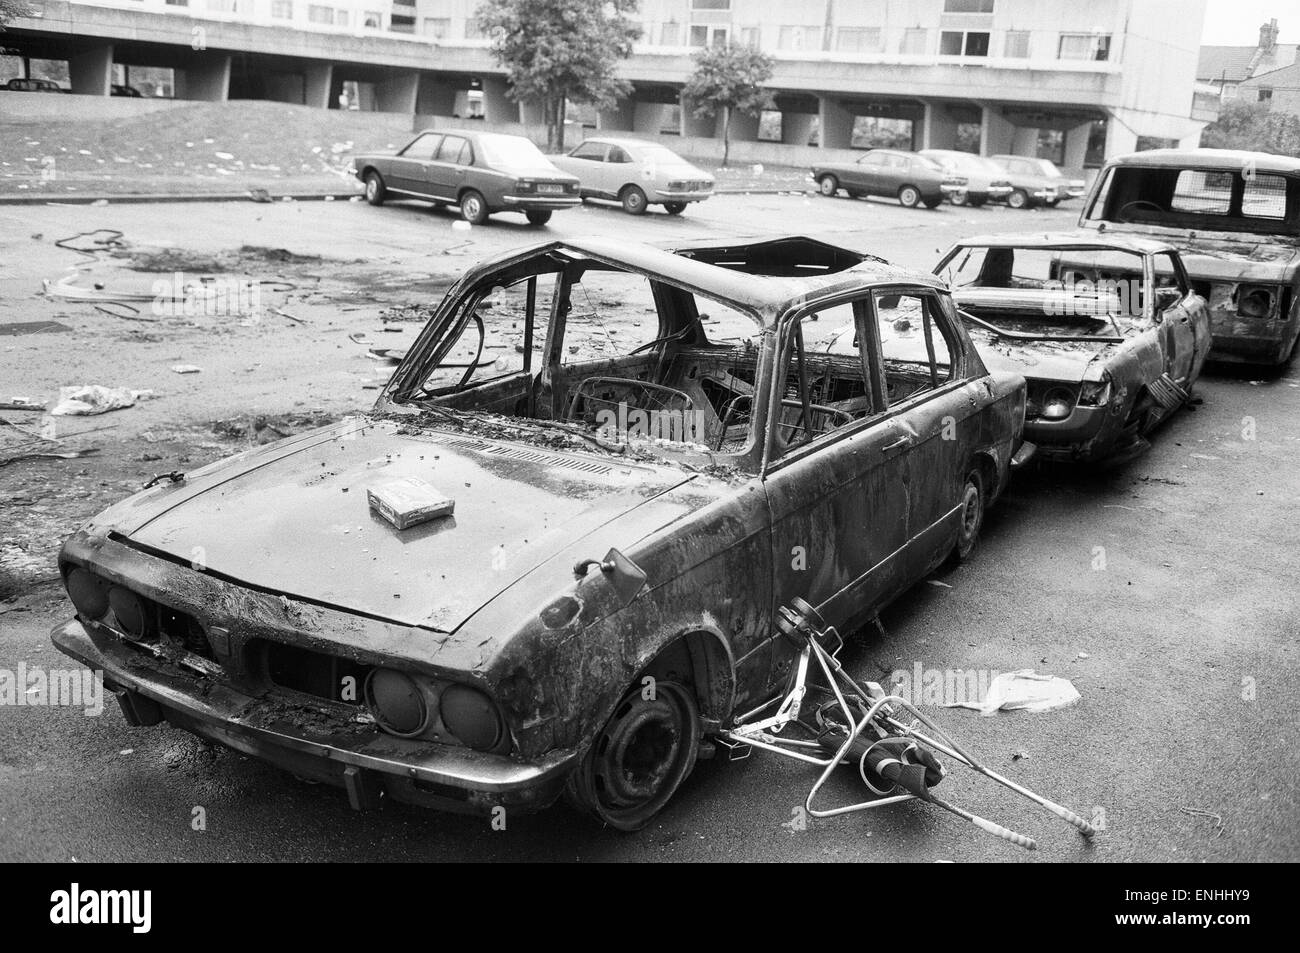 Aftermath of the riots which broke out in the Broadwater Farm estate in Tottenham, North London. The riot started the day after local resident Cynthia Jarrett died during a disturbance while police searched her home. Picture shows burnt out cars the day f Stock Photo